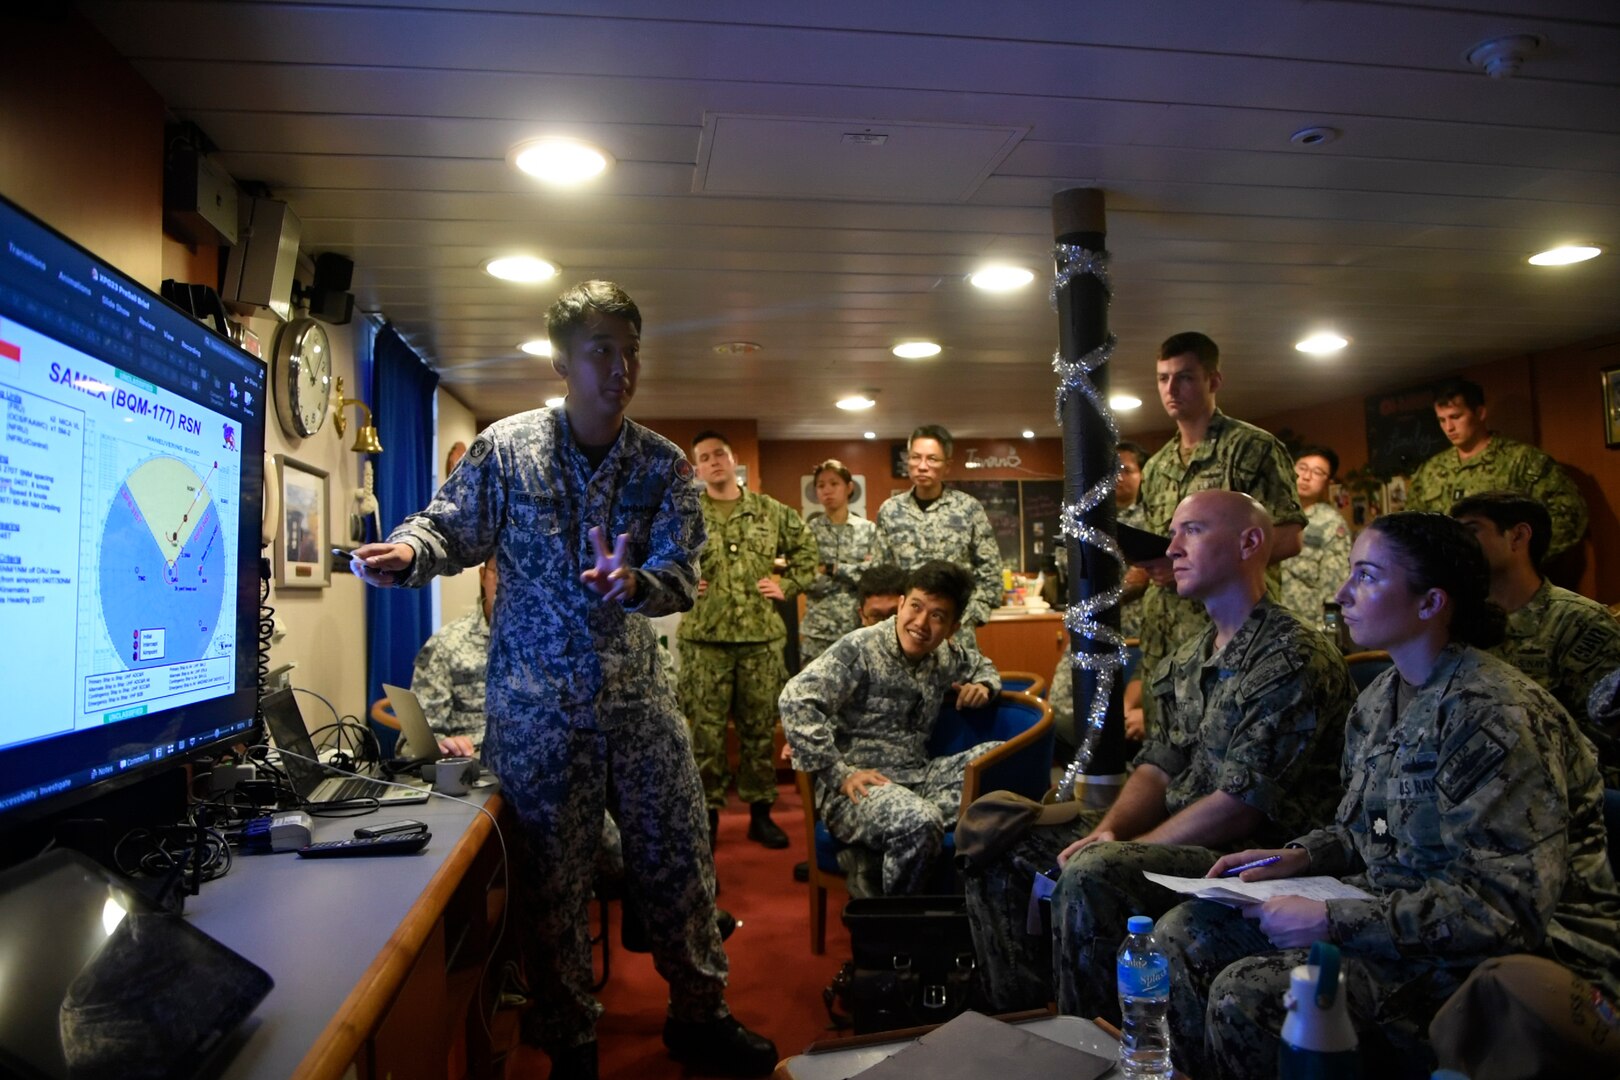 SANTA RITA, Guam, (June 19, 2023) – U.S. and Singaporean Sailors participate in operational brief aboard the Formidable-class stealth frigate RSS Tenacious (71), during Exercise Pacific Griffin 2023. Pacific Griffin 2023 is a biennial maritime exercise between the U.S. and Republic of Singapore. Conducted in the waters near Guam, the two navies enhance combined maritime proficiency while strengthening relationships during two weeks of dynamic training evolutions ashore and at sea. USS Manchester (LCS 14), part of Destroyer Squadron 7, is on a rotational deployment operating in the U.S. 7TH Fleet area of operations to enhance interoperability with Allies and partners and serve as a ready-response force in support of a free and open Indo-Pacific region. (U.S. Navy photo by Mass Communication Specialist 2nd Class Christopher Thomas)